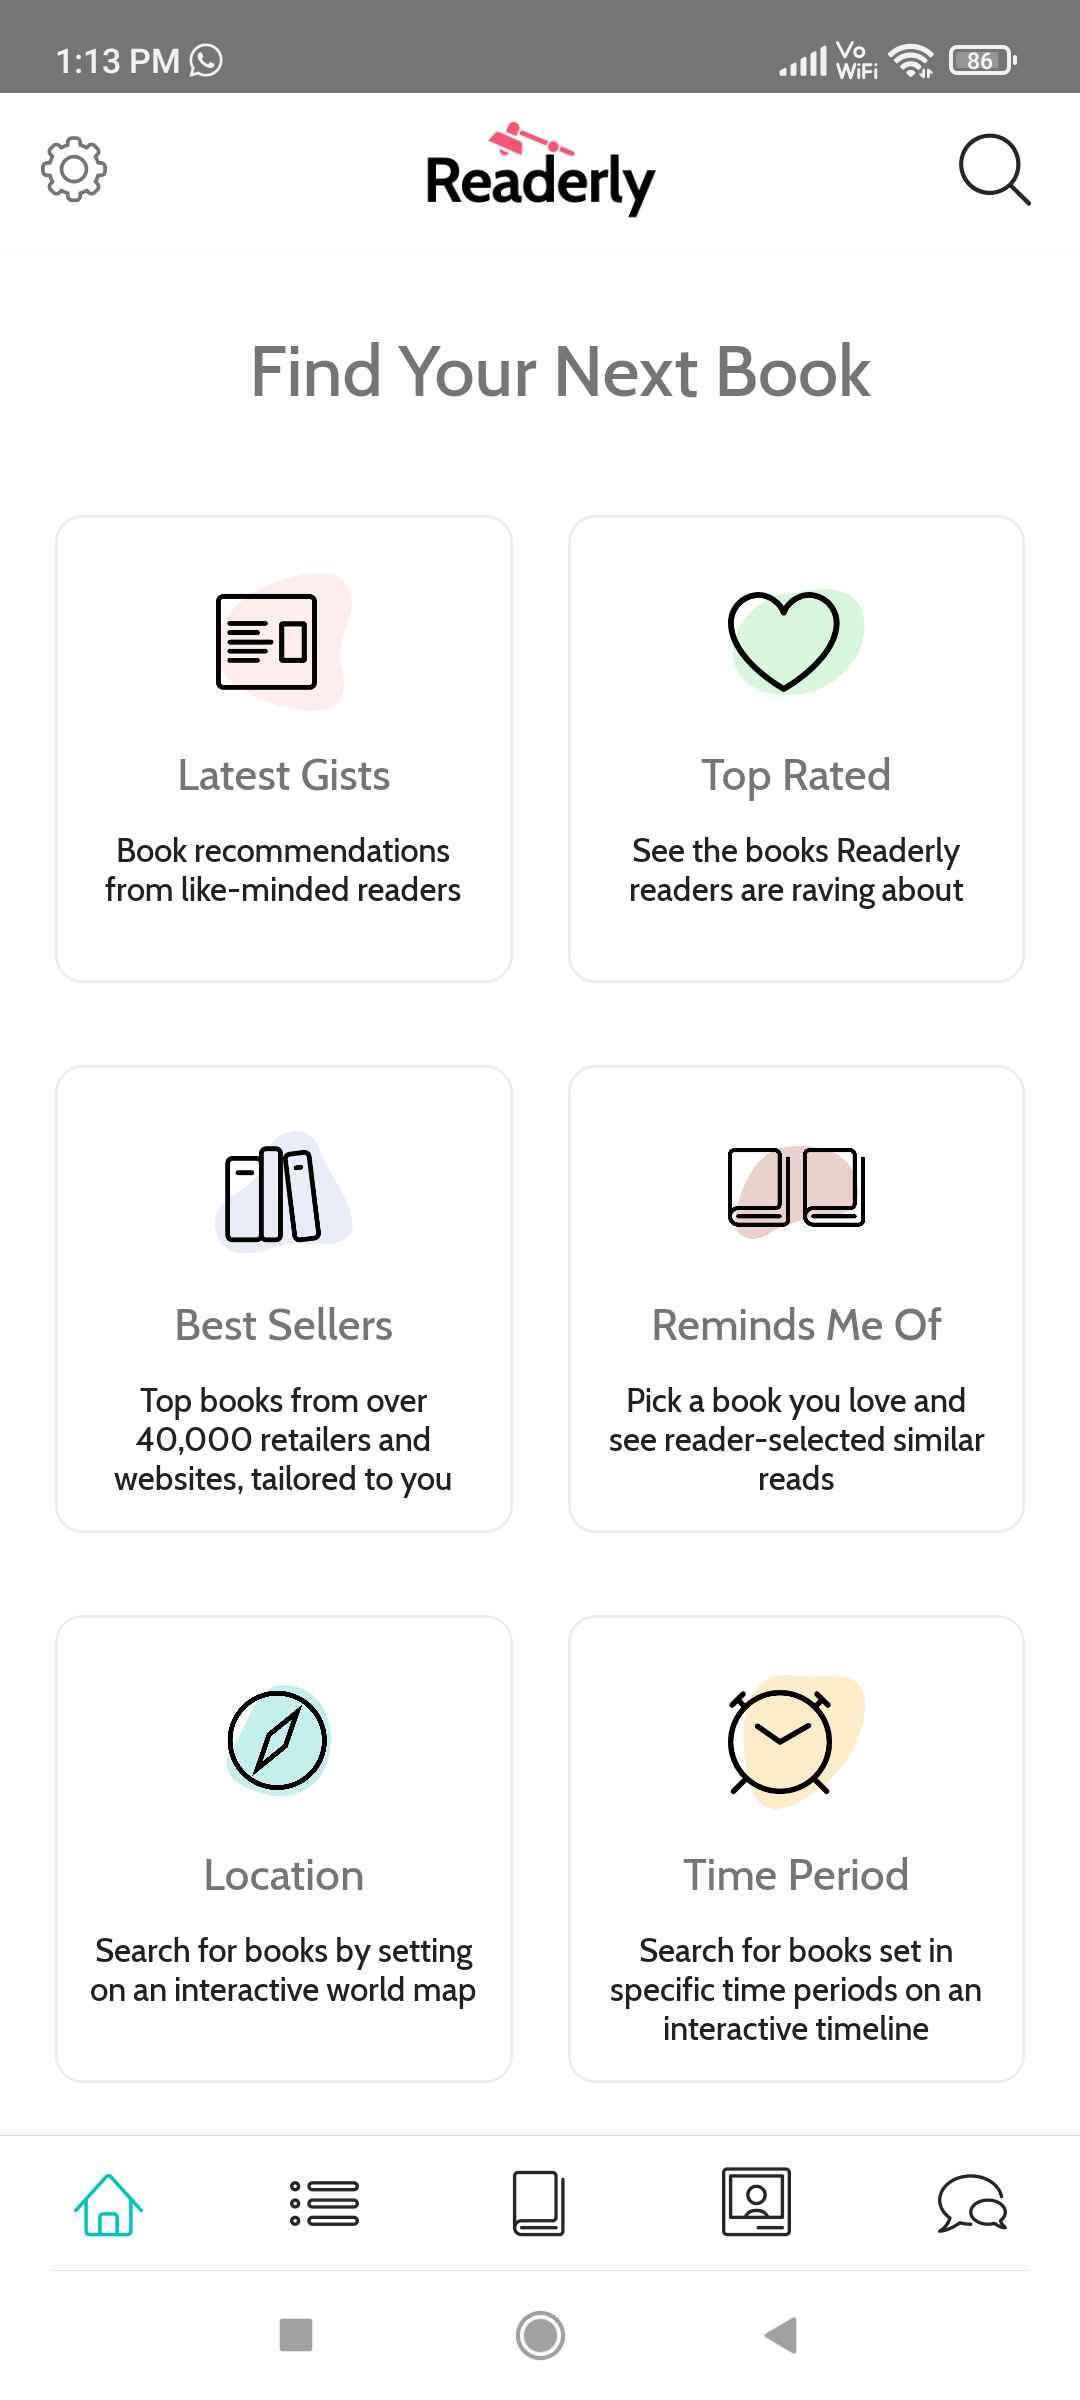 Apart from the news feed, you can find books on Readerly through categories like best sellers, most recommended, similar books, etc.